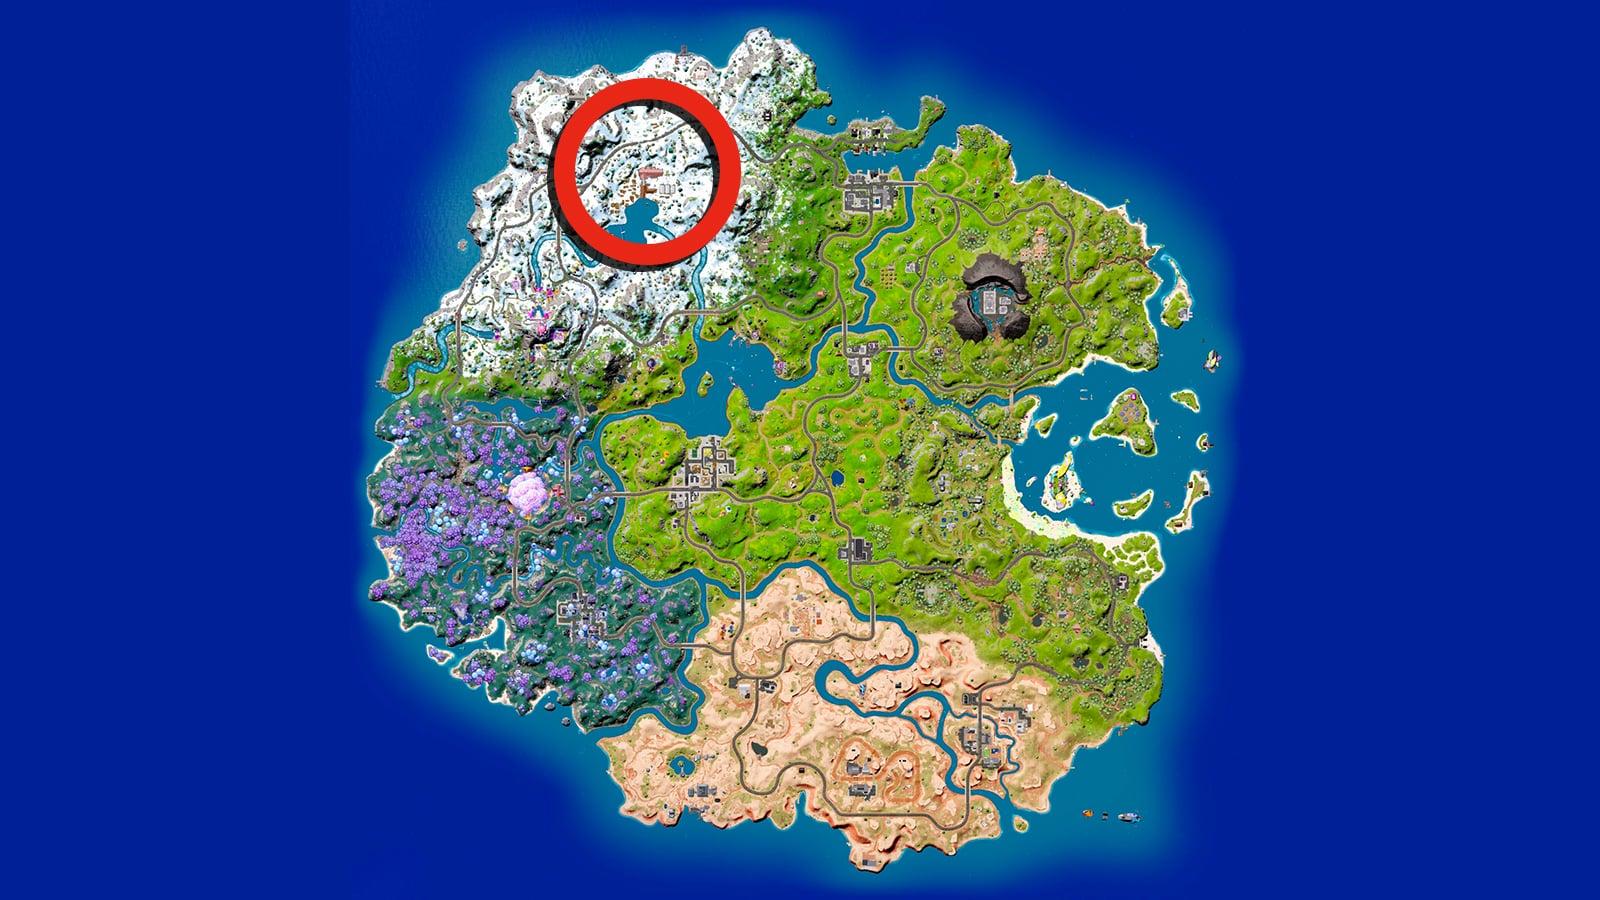 Timber Pine locations on the Fortnite map